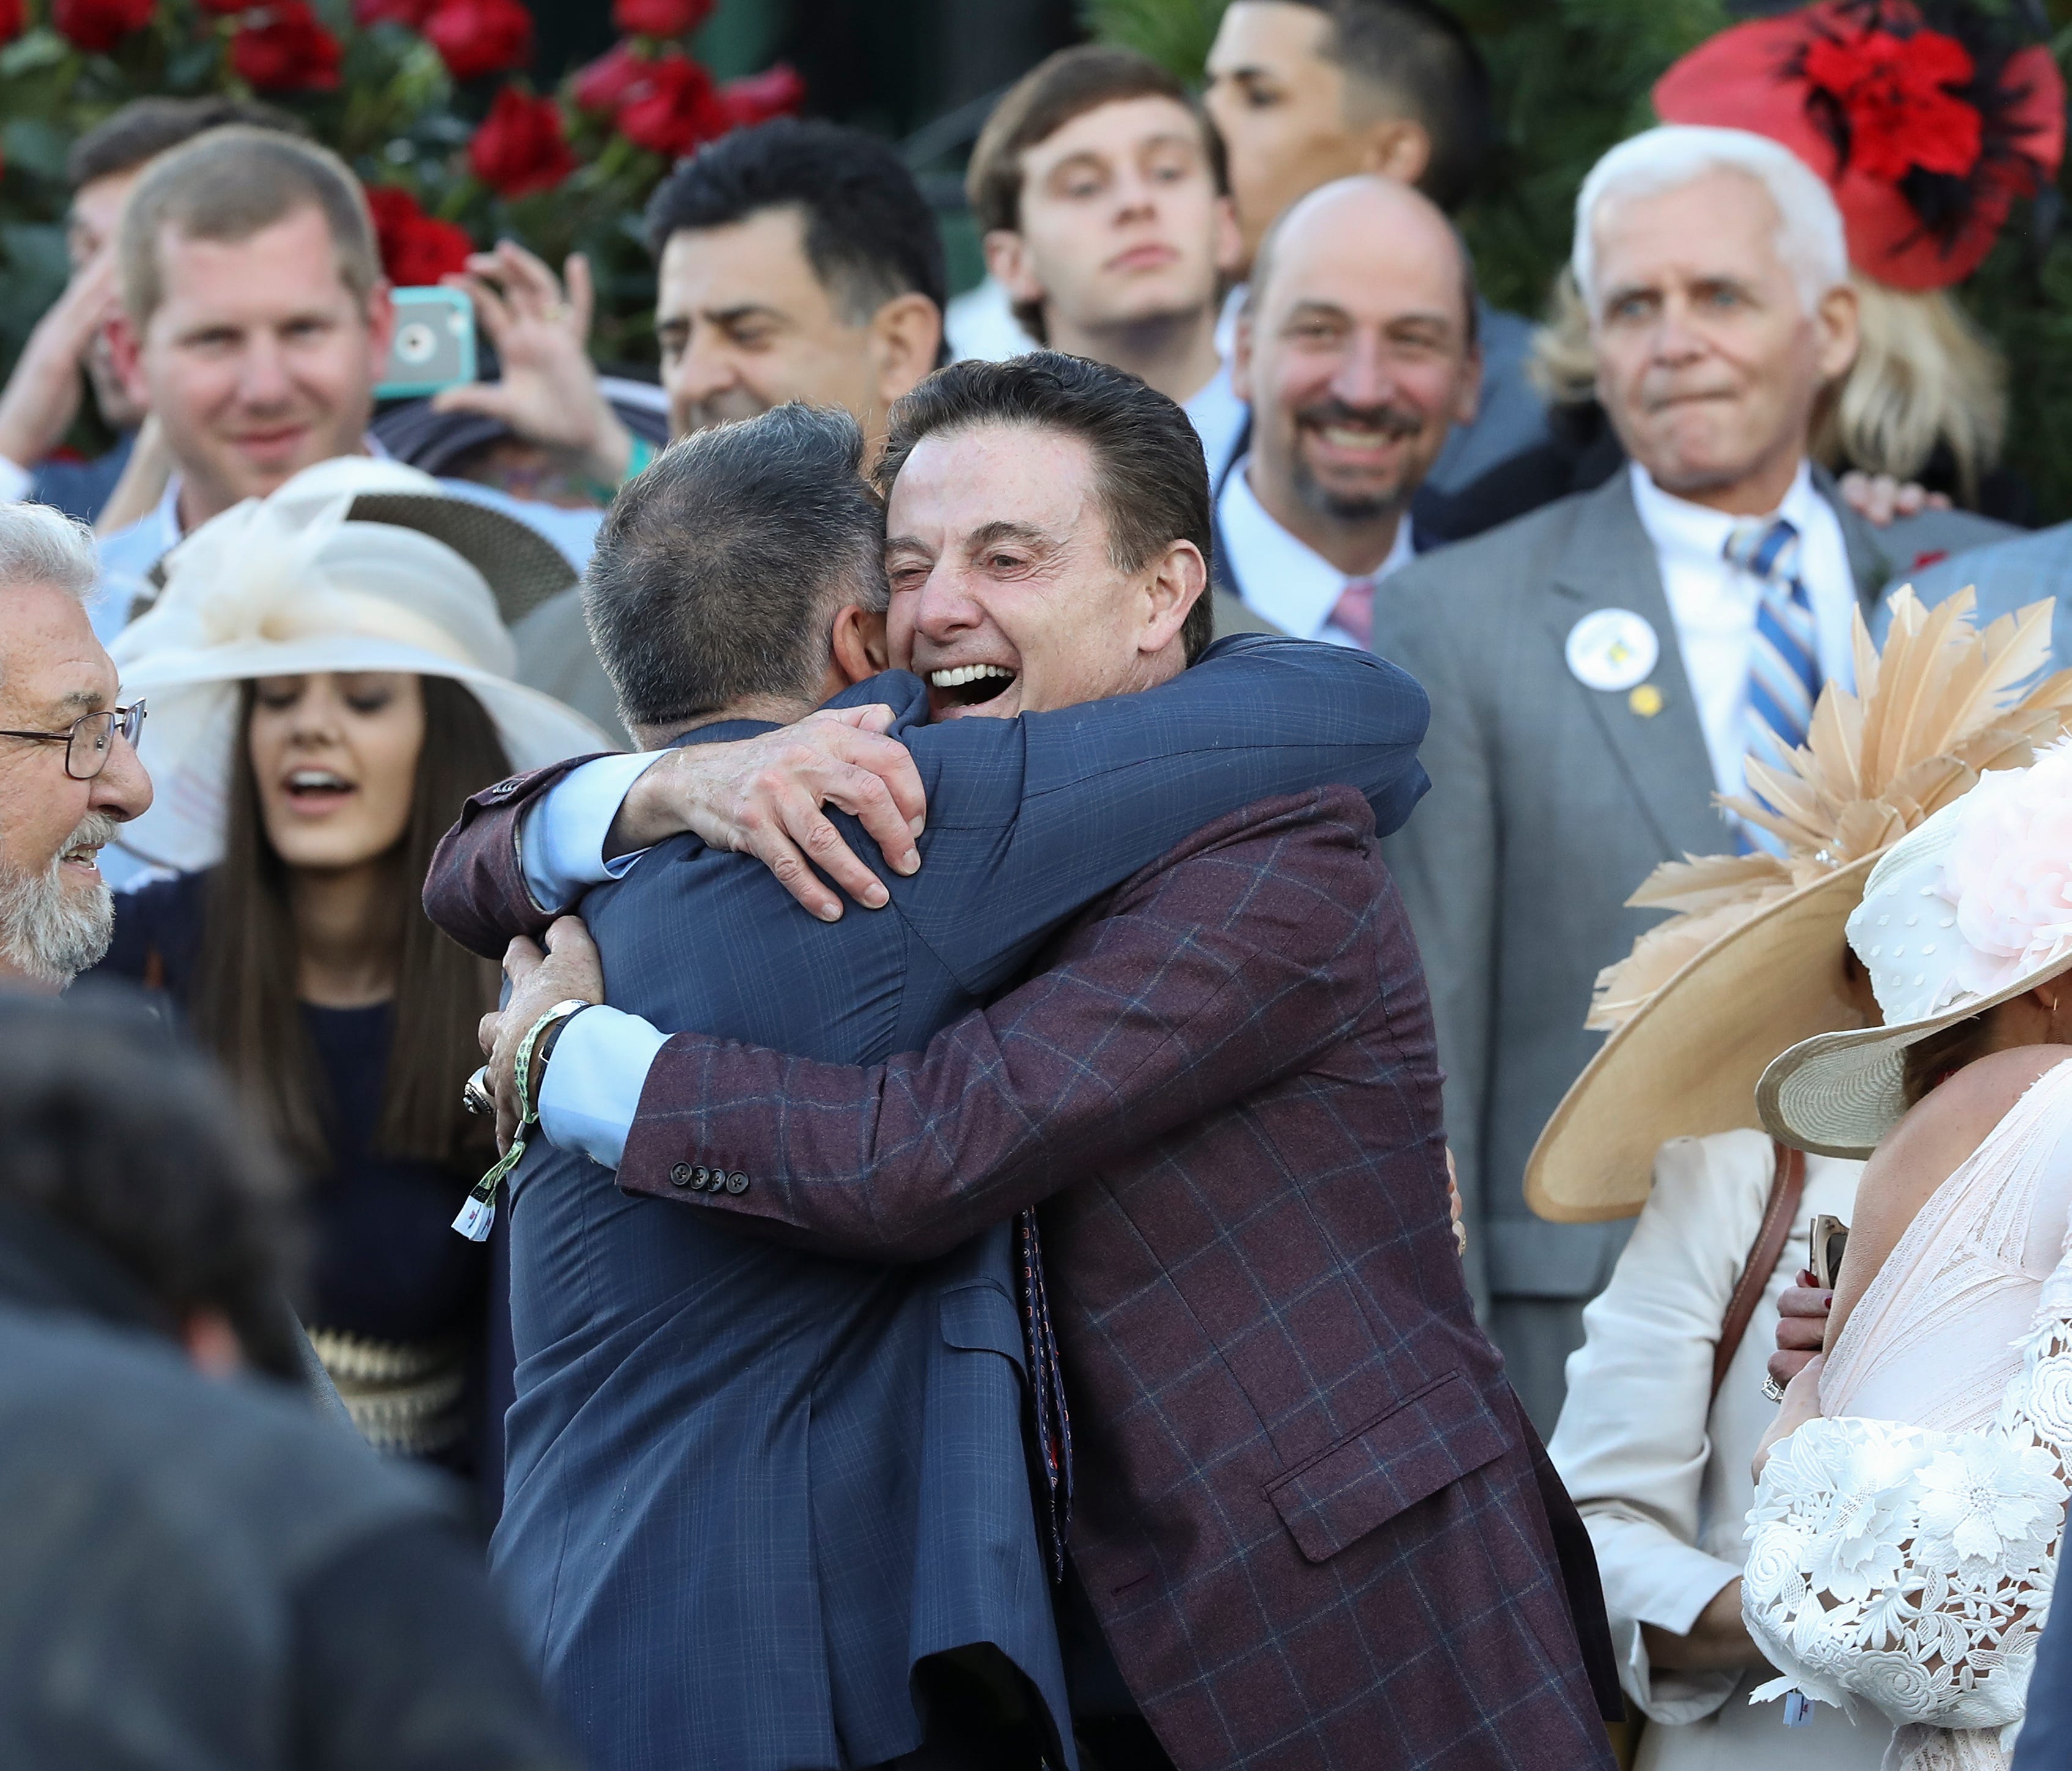 U of L head coach Rick Pitino celebrated in the winner's circle after jockey John Velazquez rode Always Dreaming to victory in The Kentucky Derby at Churchill Downs.    May 6, 2017